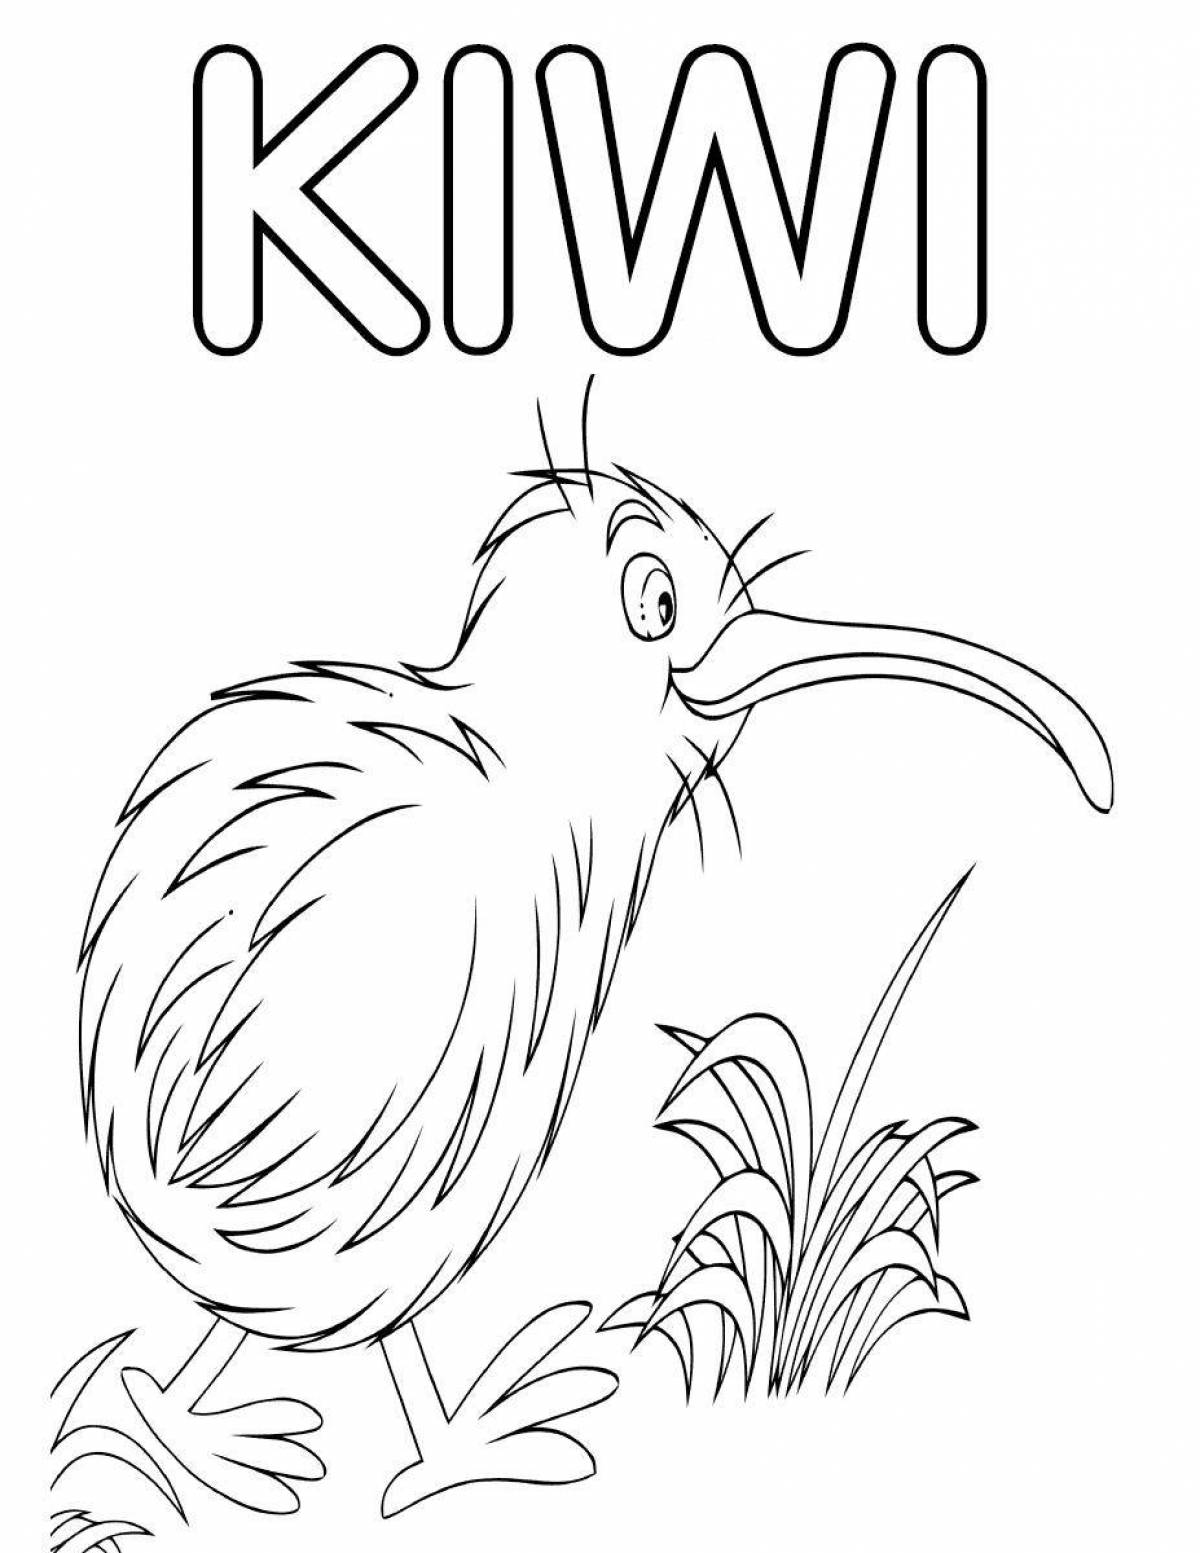 Adorable kiwi willy coloring page